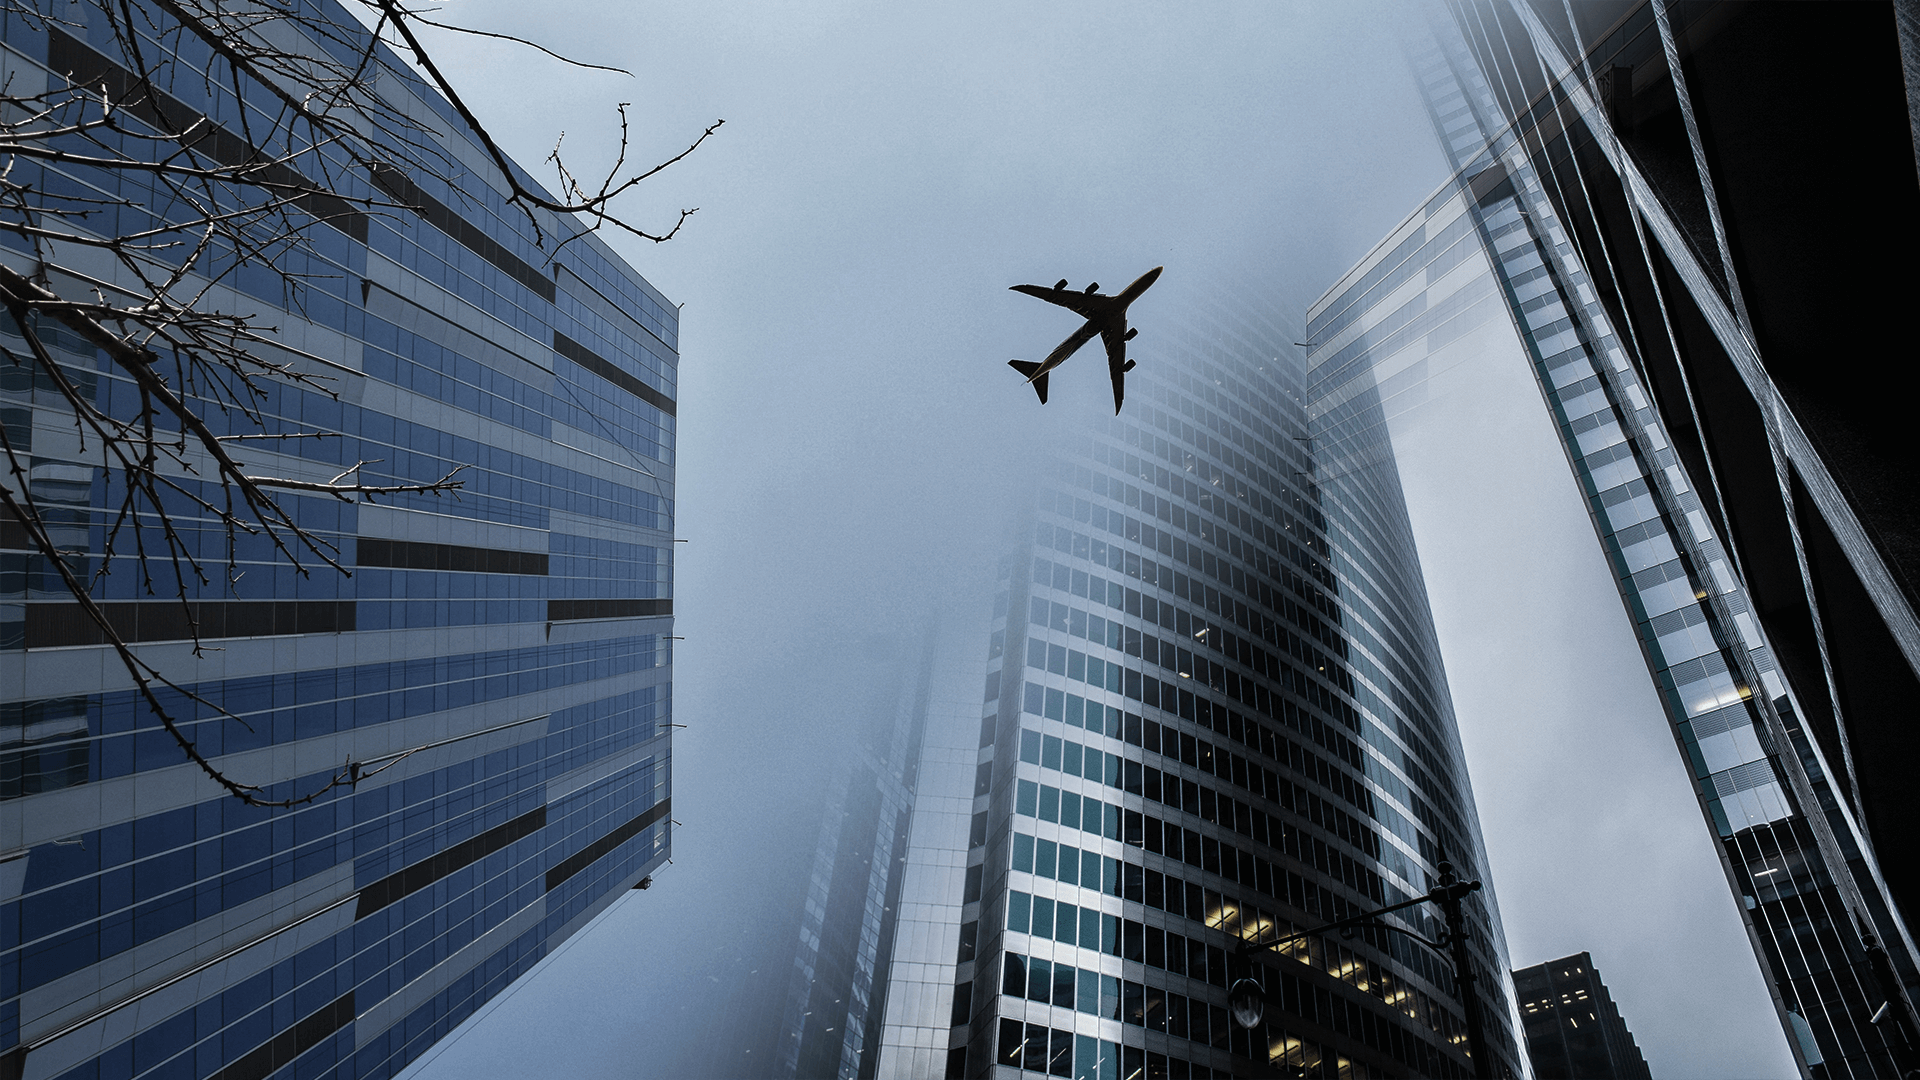 A tall building with many windows and an airplane in the sky